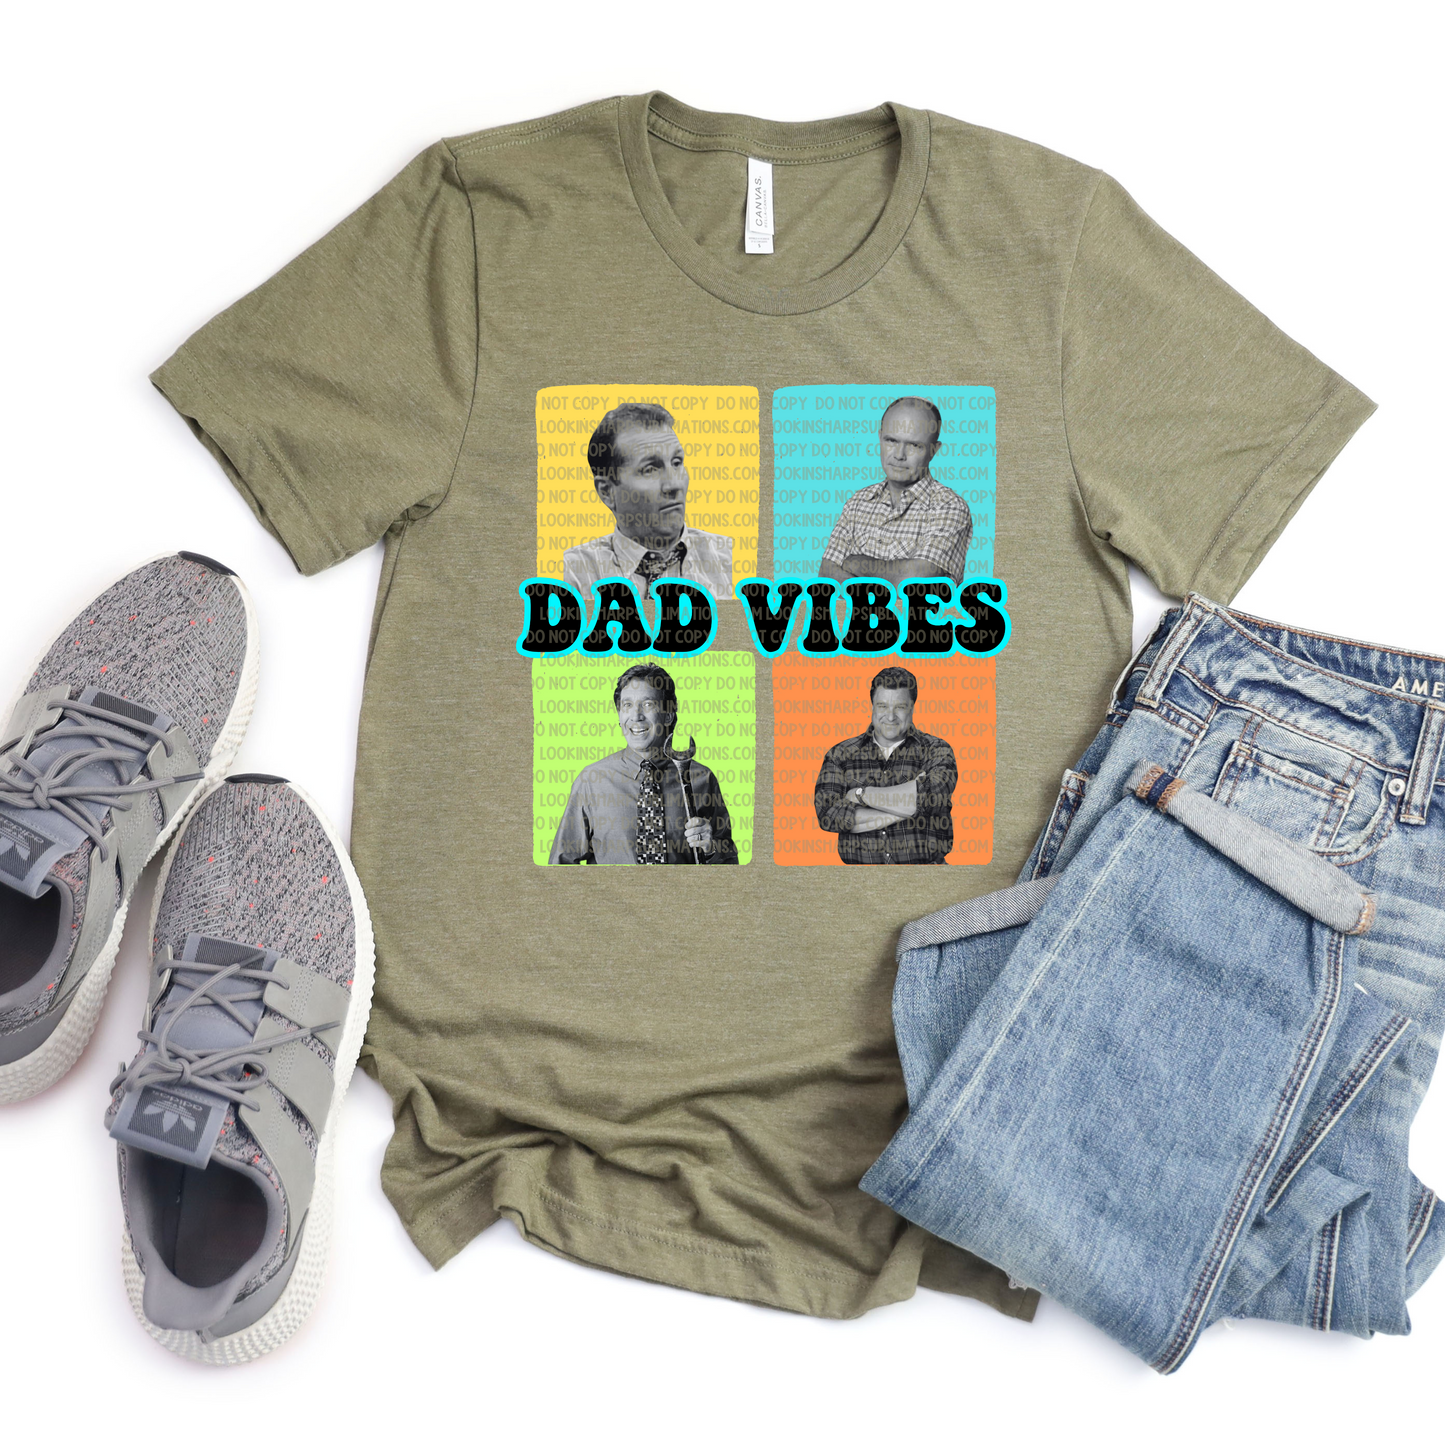 90s Mom & Dad Gang Sheet **DO NOT COMBINE WITH OTHER ITEMS** - DTF TRANSFERS 3 to 5 Business Days